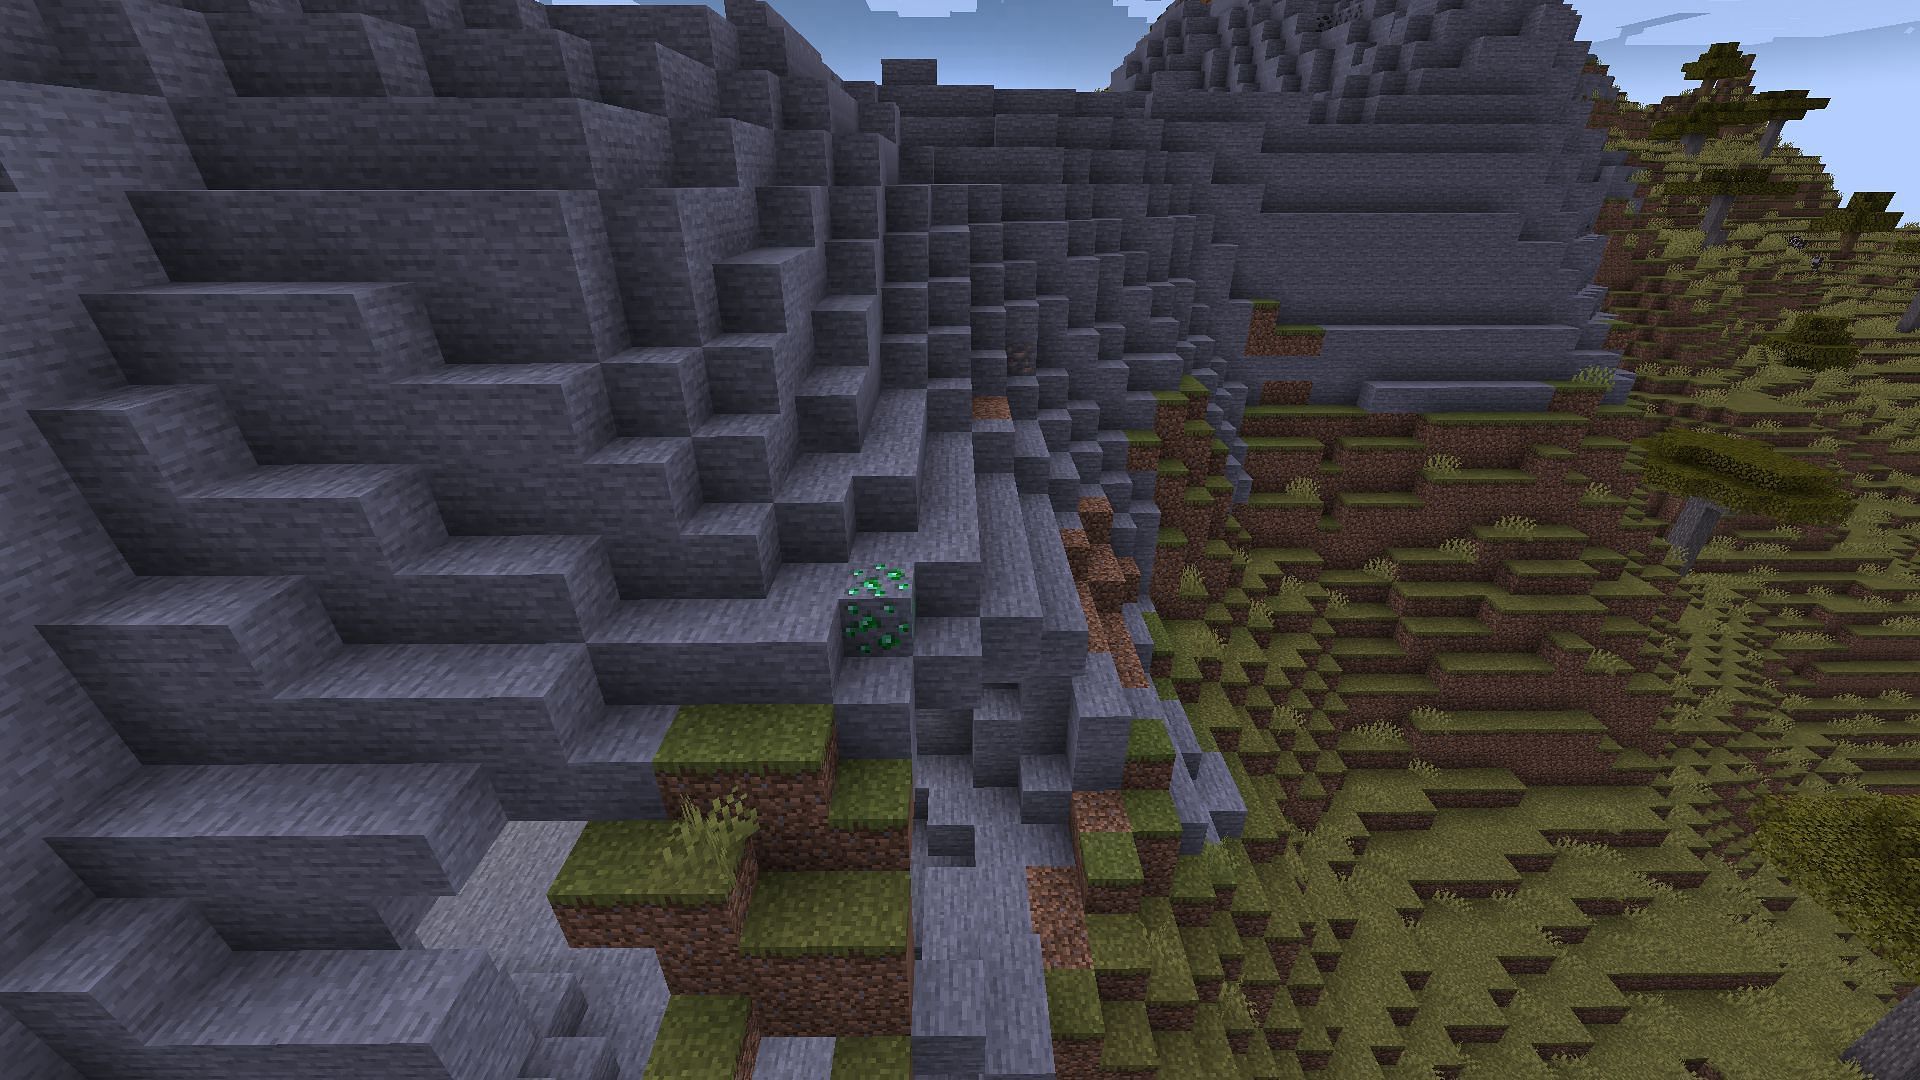 Emerald ore in the side of a mountain (Image via Mojang)